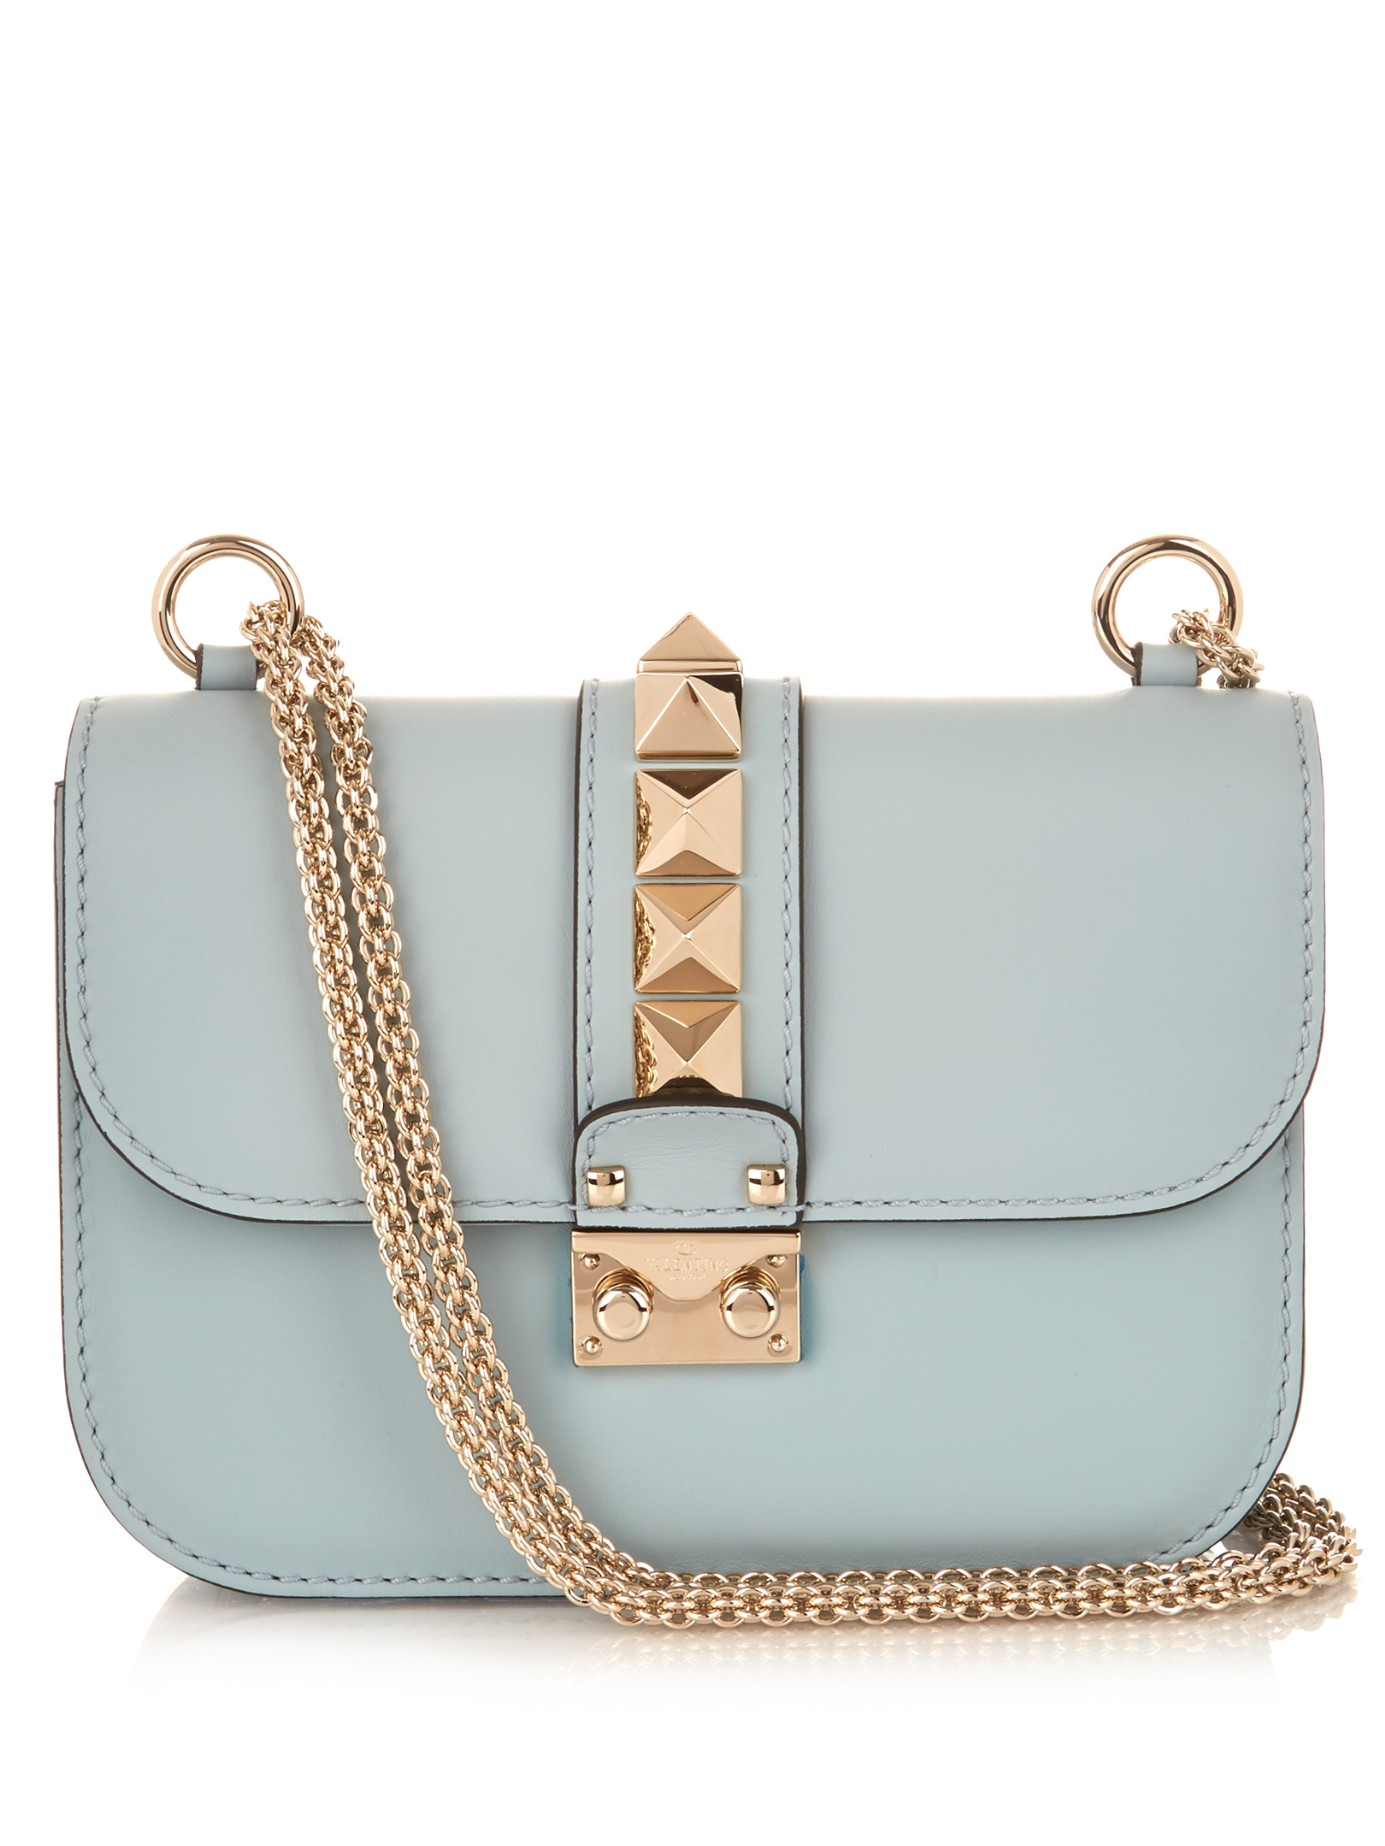 Lyst - Valentino Lock Small Leather Shoulder Bag in Blue